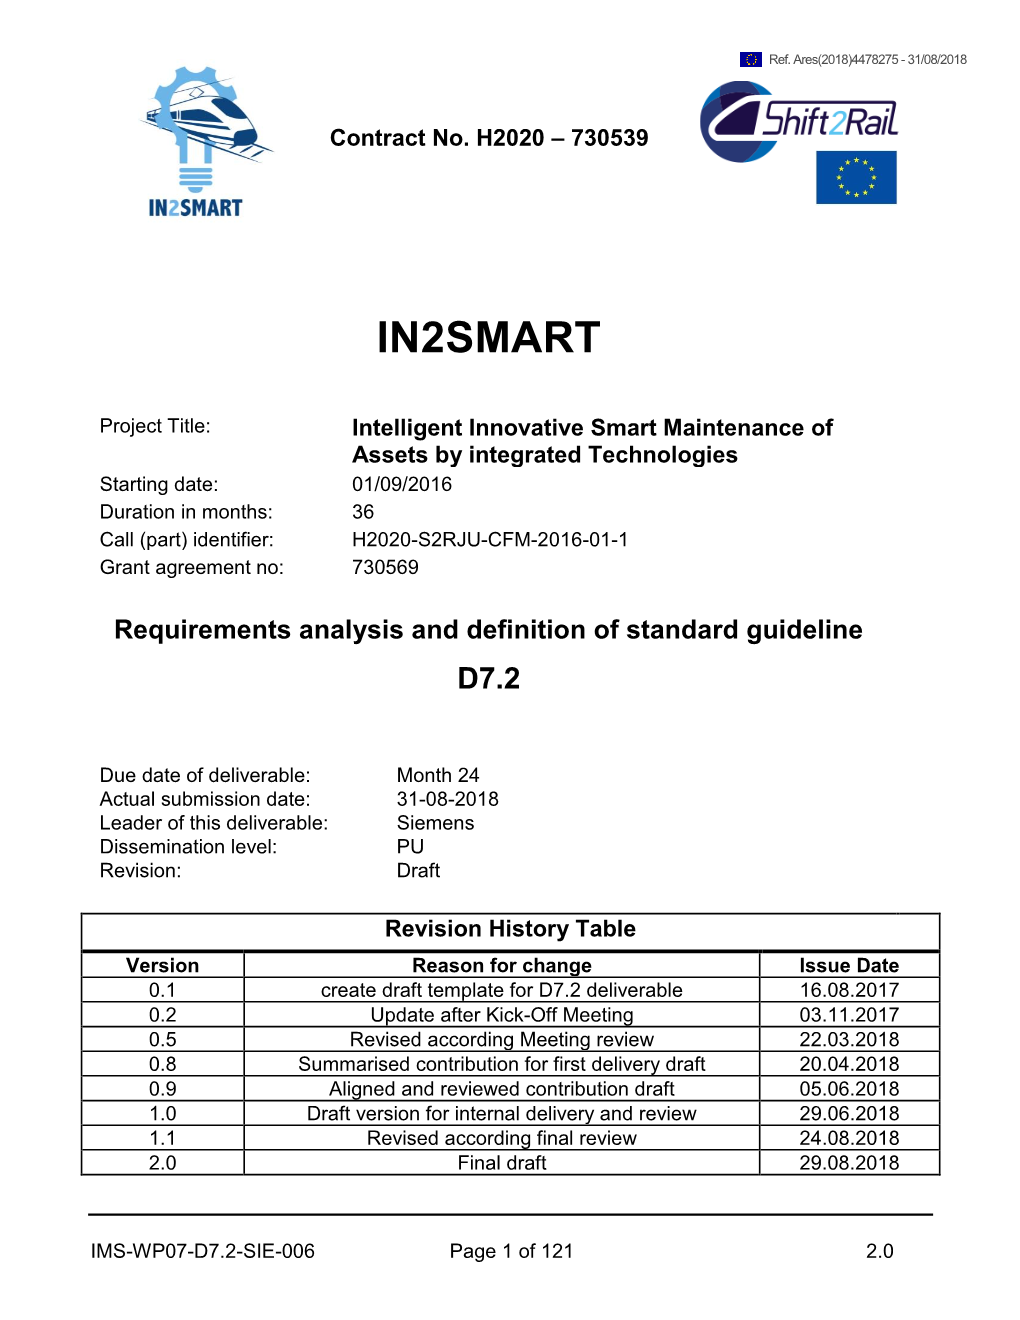 Requirements Analysis and Definition of Standard Guideline D7.2